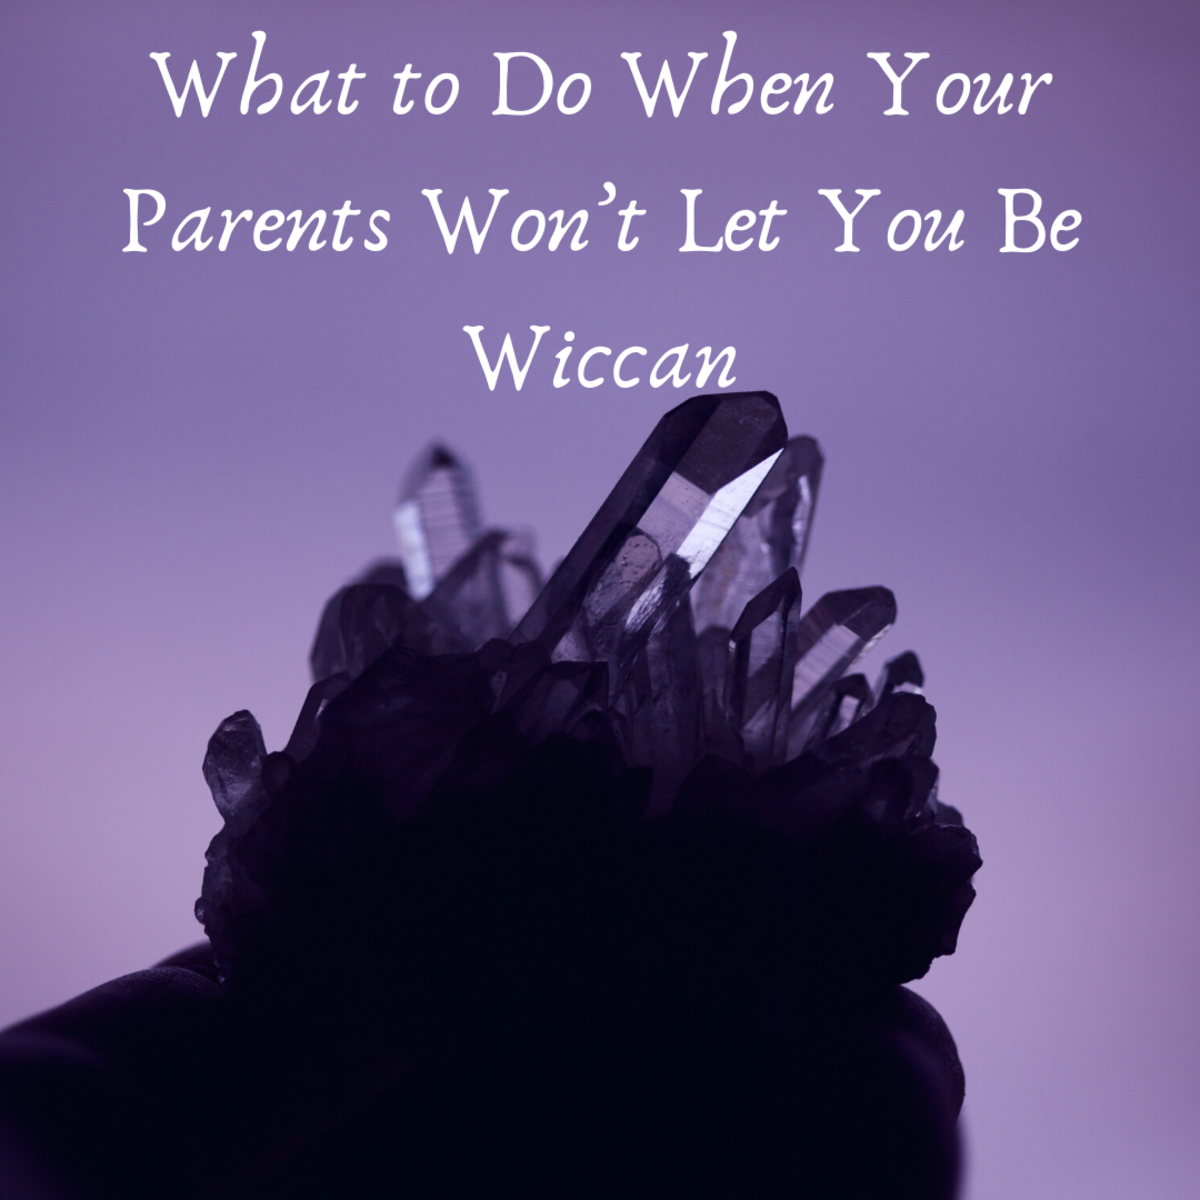 Read on to learn what you can do when your parents won’t let you be Wiccan